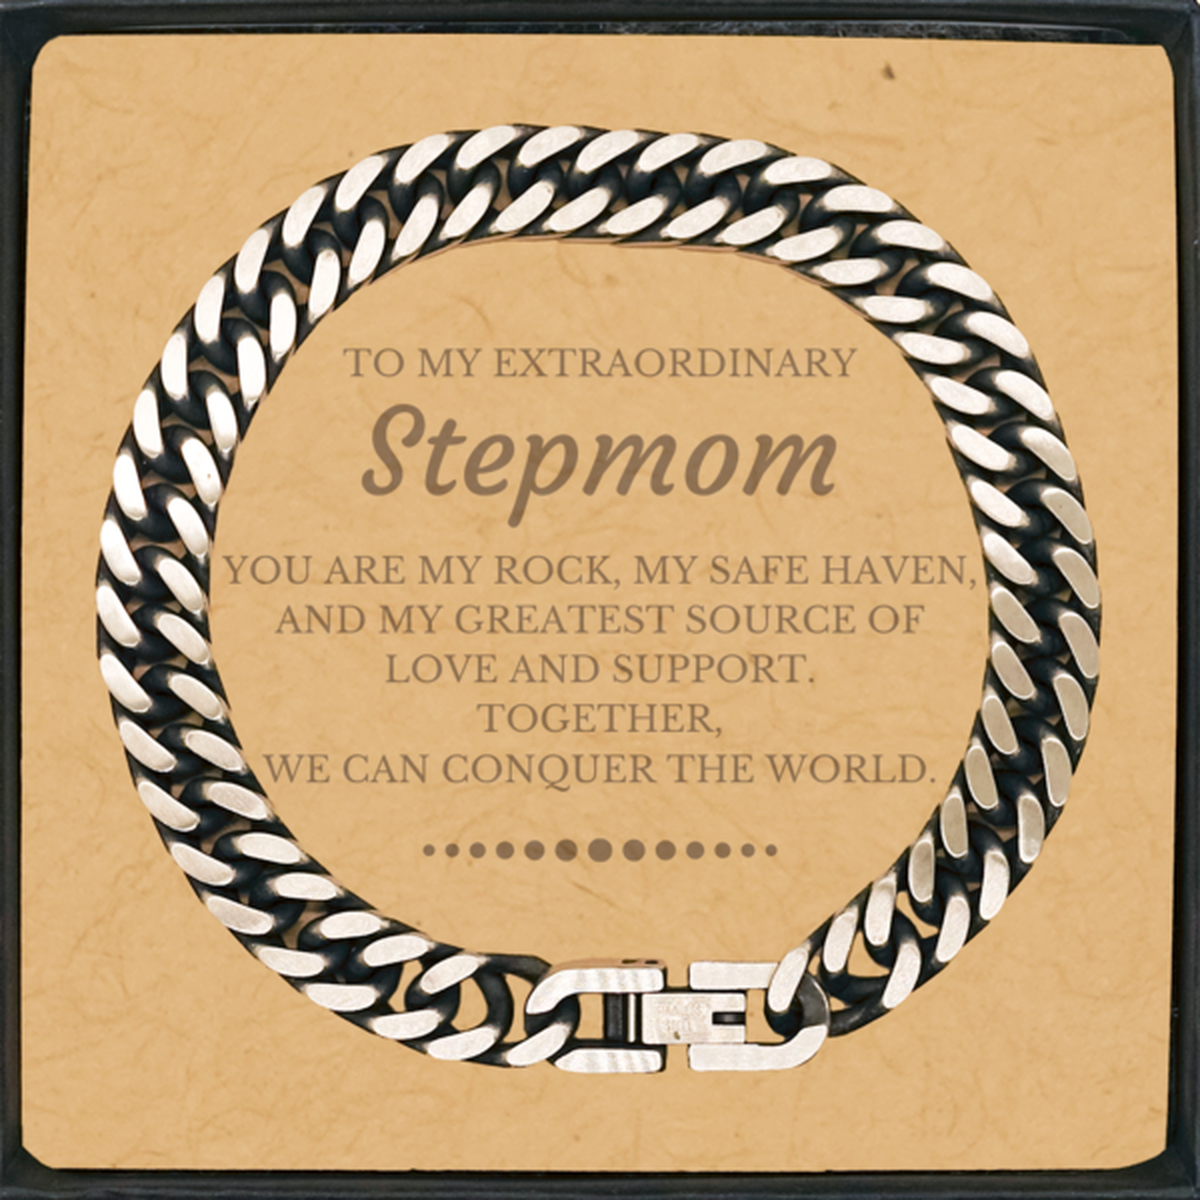 To My Extraordinary Stepmom Gifts, Together, we can conquer the world, Birthday Cuban Link Chain Bracelet For Stepmom, Christmas Gifts For Stepmom